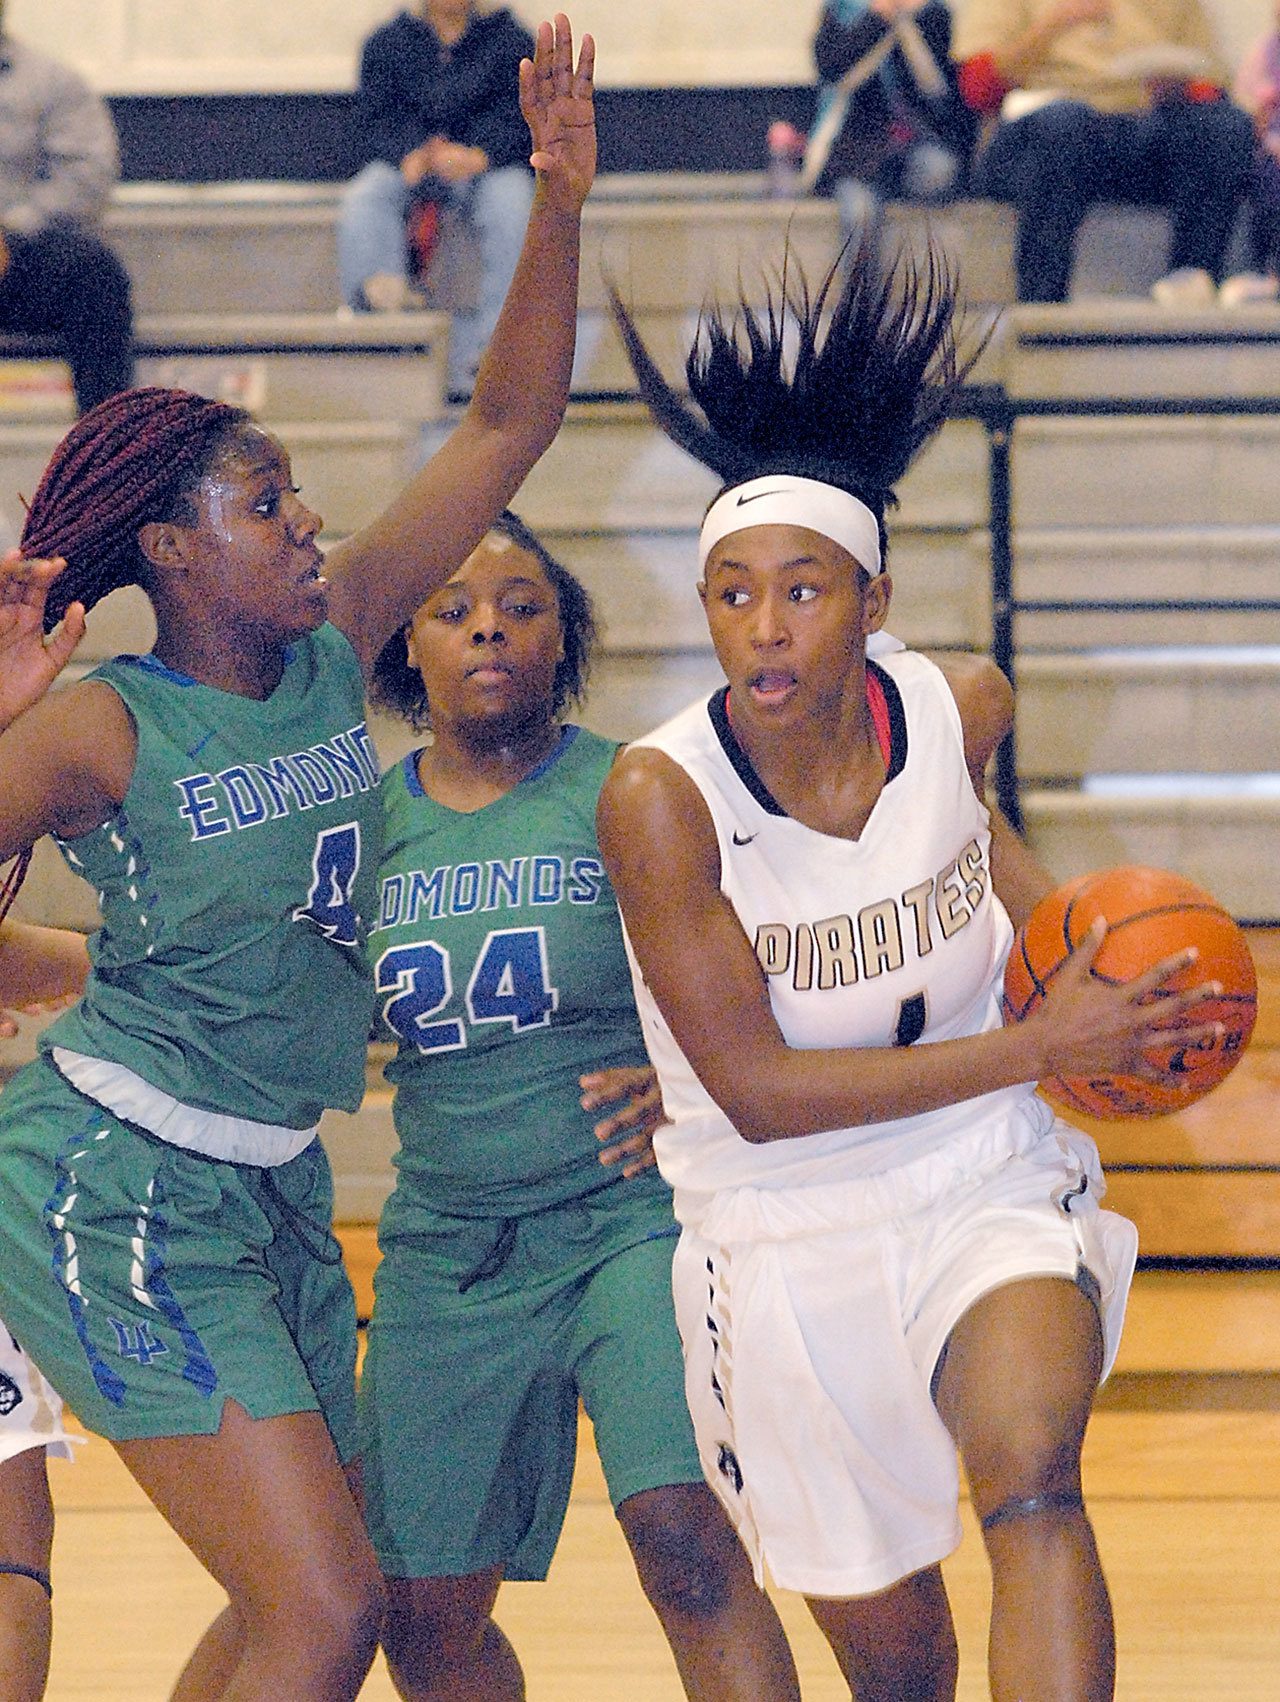 Keith Thorpe/Peninsula Daily News Peninsula’s Anaya Rodisha, right, drives through the lane as Edmonds’ Damaiya Ward, left, and Montasia Brown defend during the second quarter on Saturday night in Port Angeles.